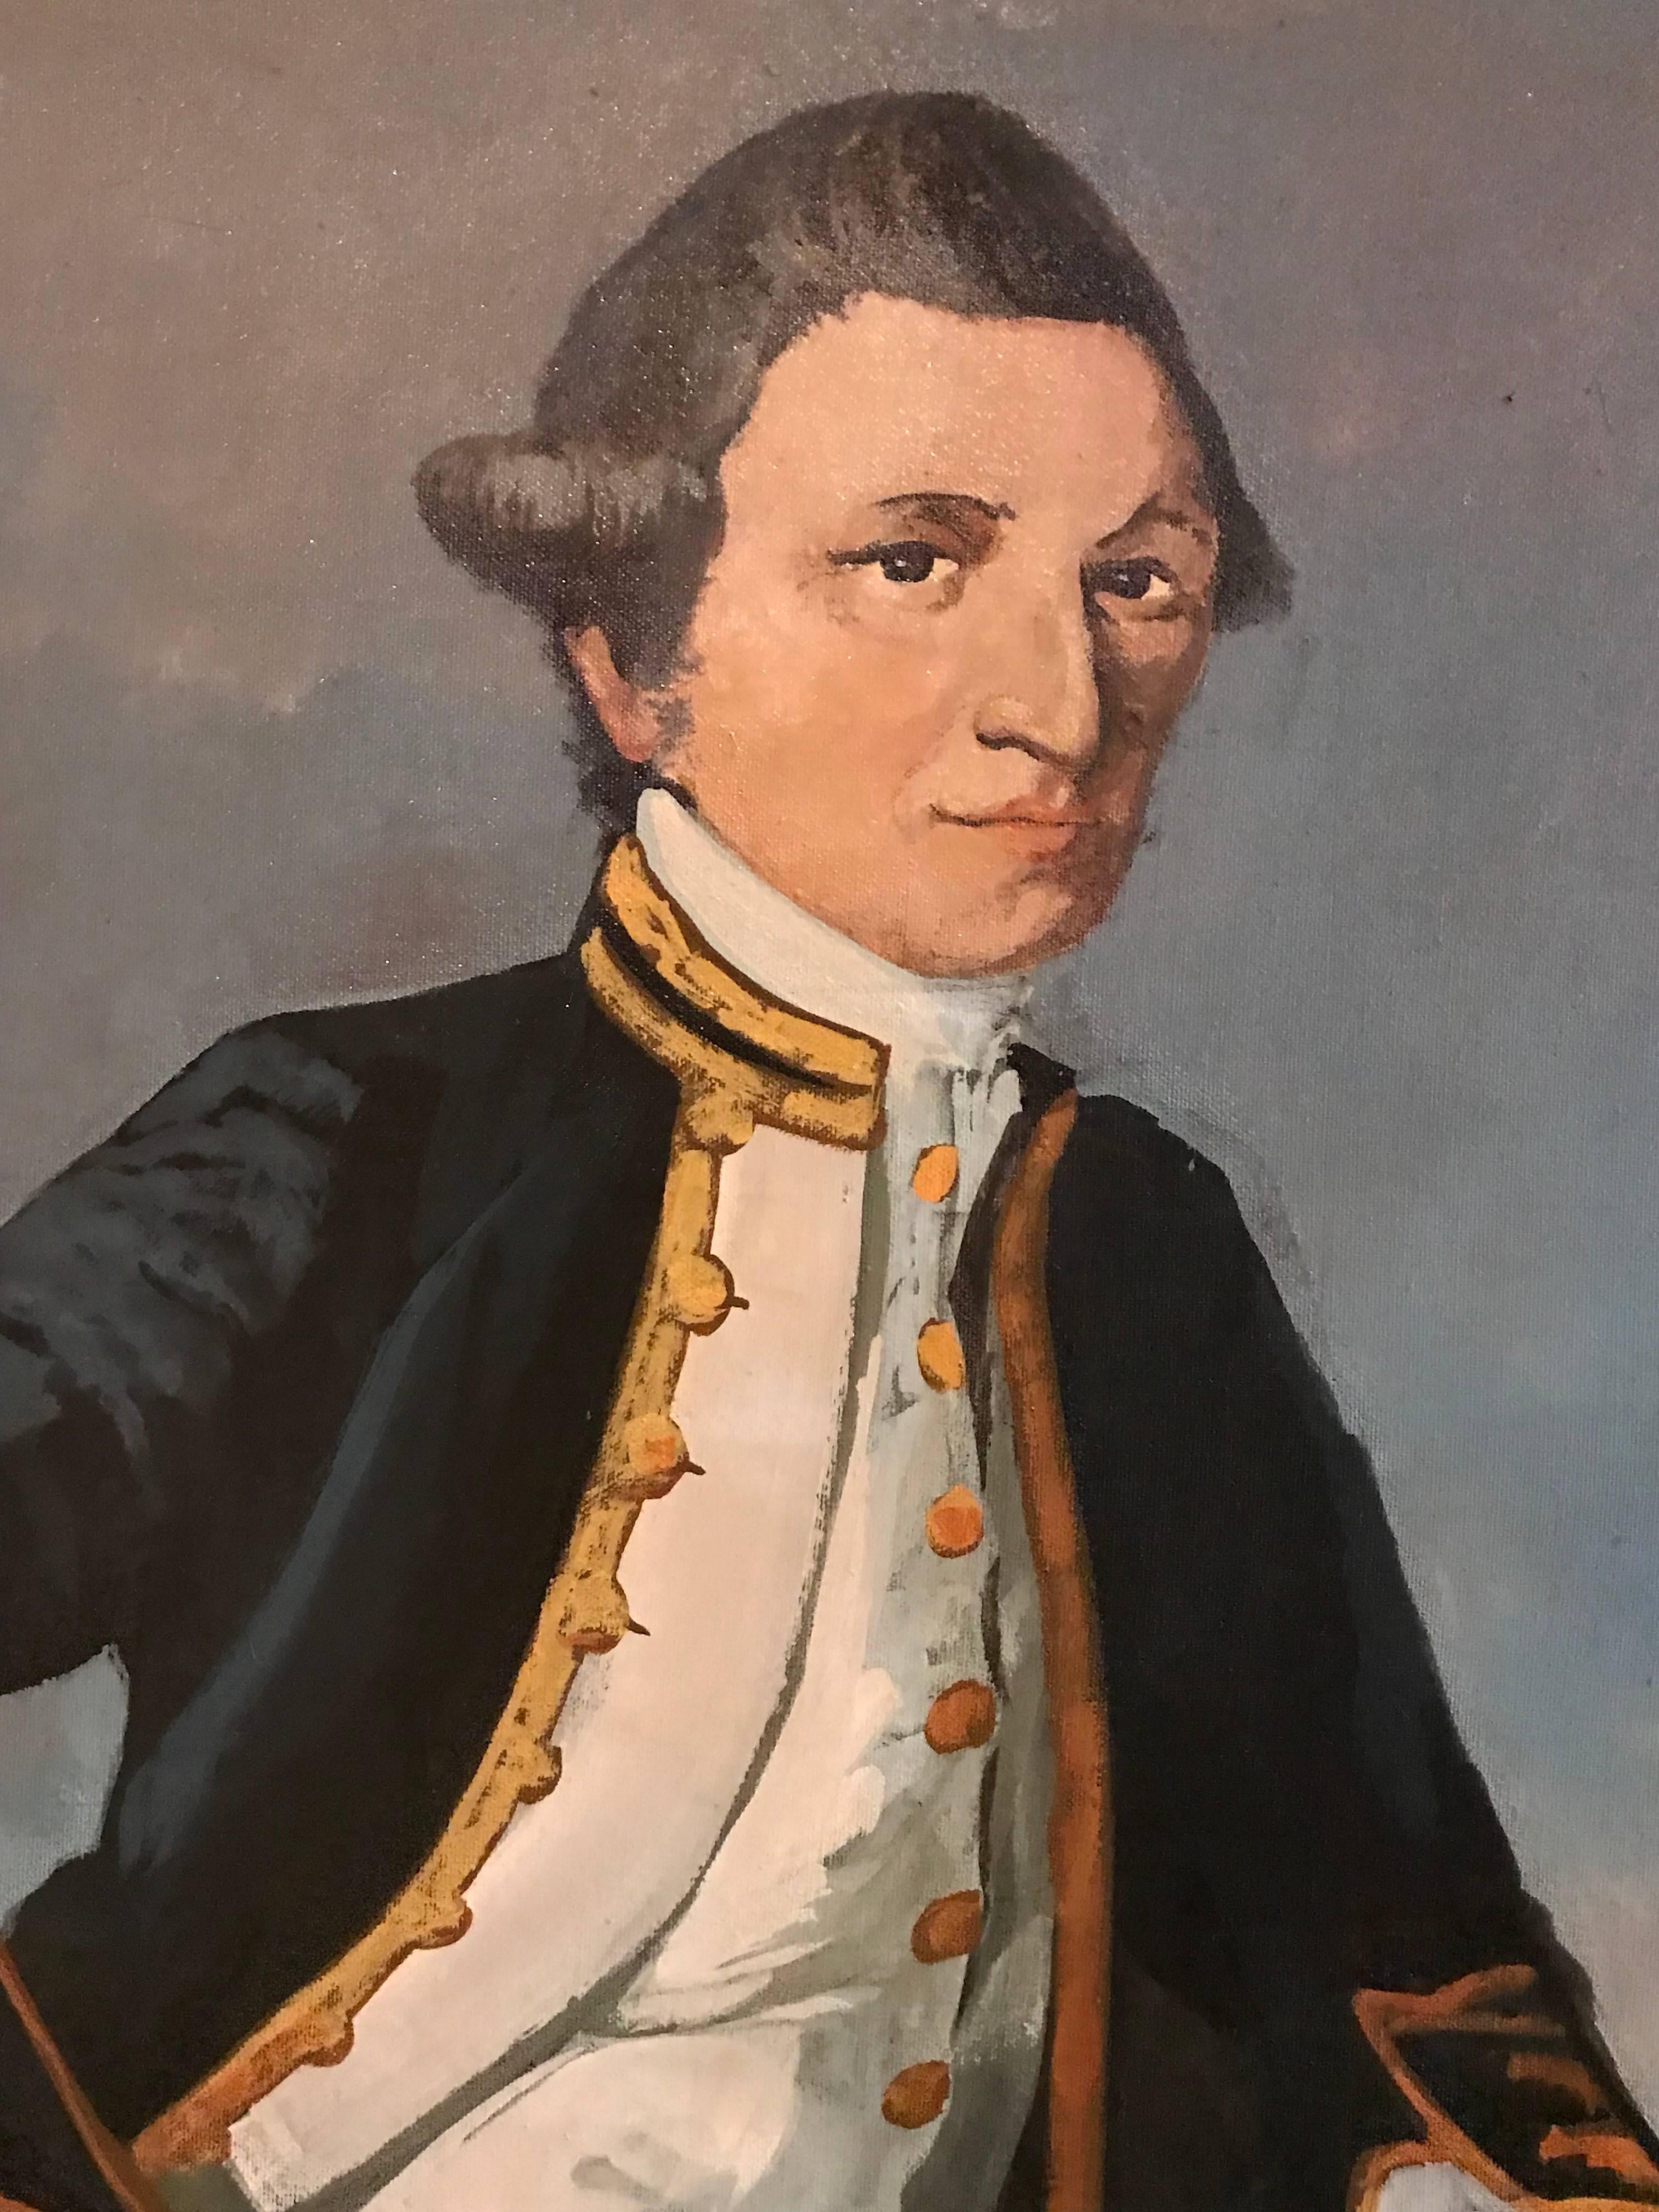 Captain James Cook
English School, circa 1970's
oil painting on board, framed

framed size: 49.5 x 37 inches

Large scale portrait of the famous 18th century explorer, James Cook. The work is taken from the earlier work by James Webber (c.1752-1793)